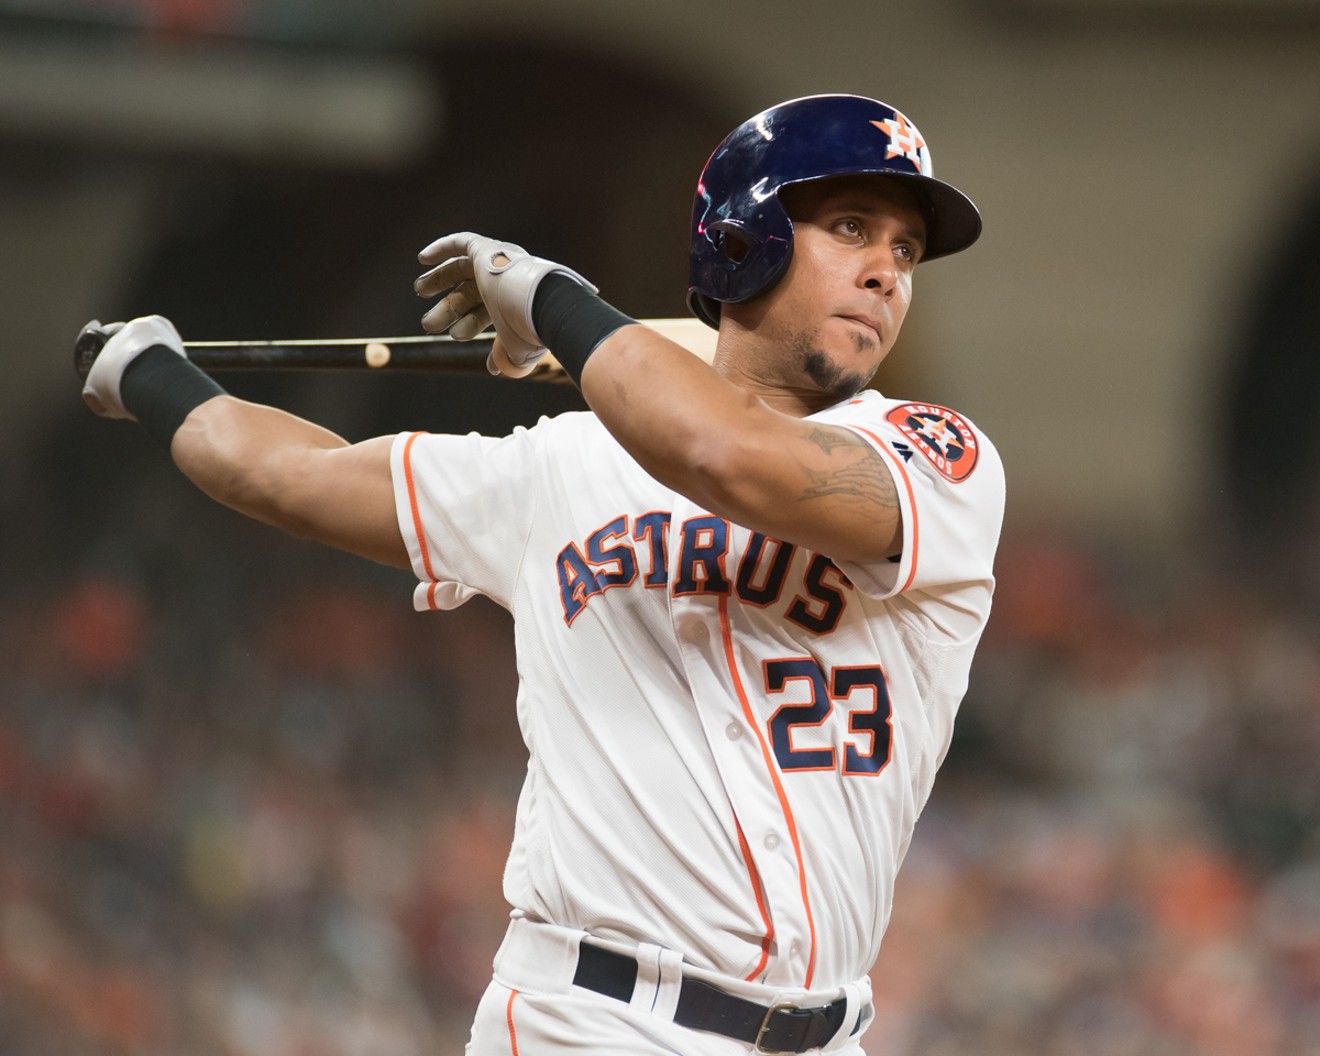 Return of Michael Brantley Is a Chemistry Play for Astros